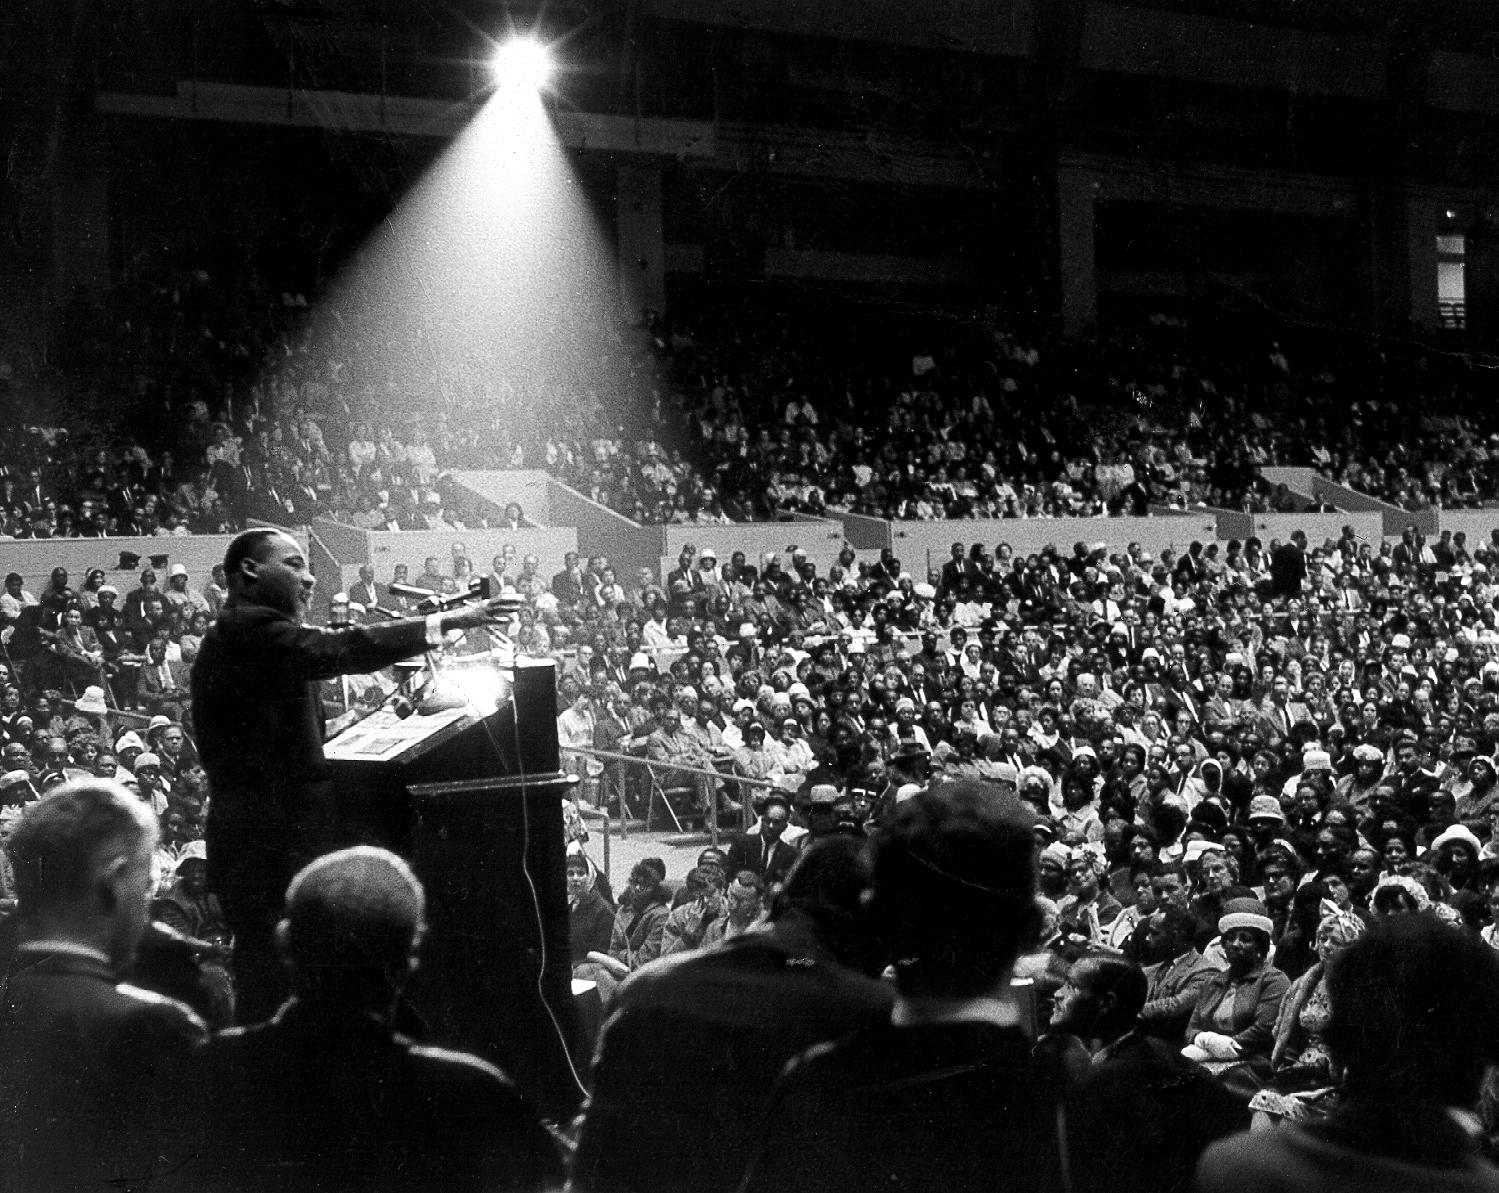 Martin Luther King, Jr. speaking to a crowd in San Francisco on June 30, 1964. In this black-and-white photograph, the humidity of the evening has cause a beam of light to appear surrounding King, as he gestures from a lectern.